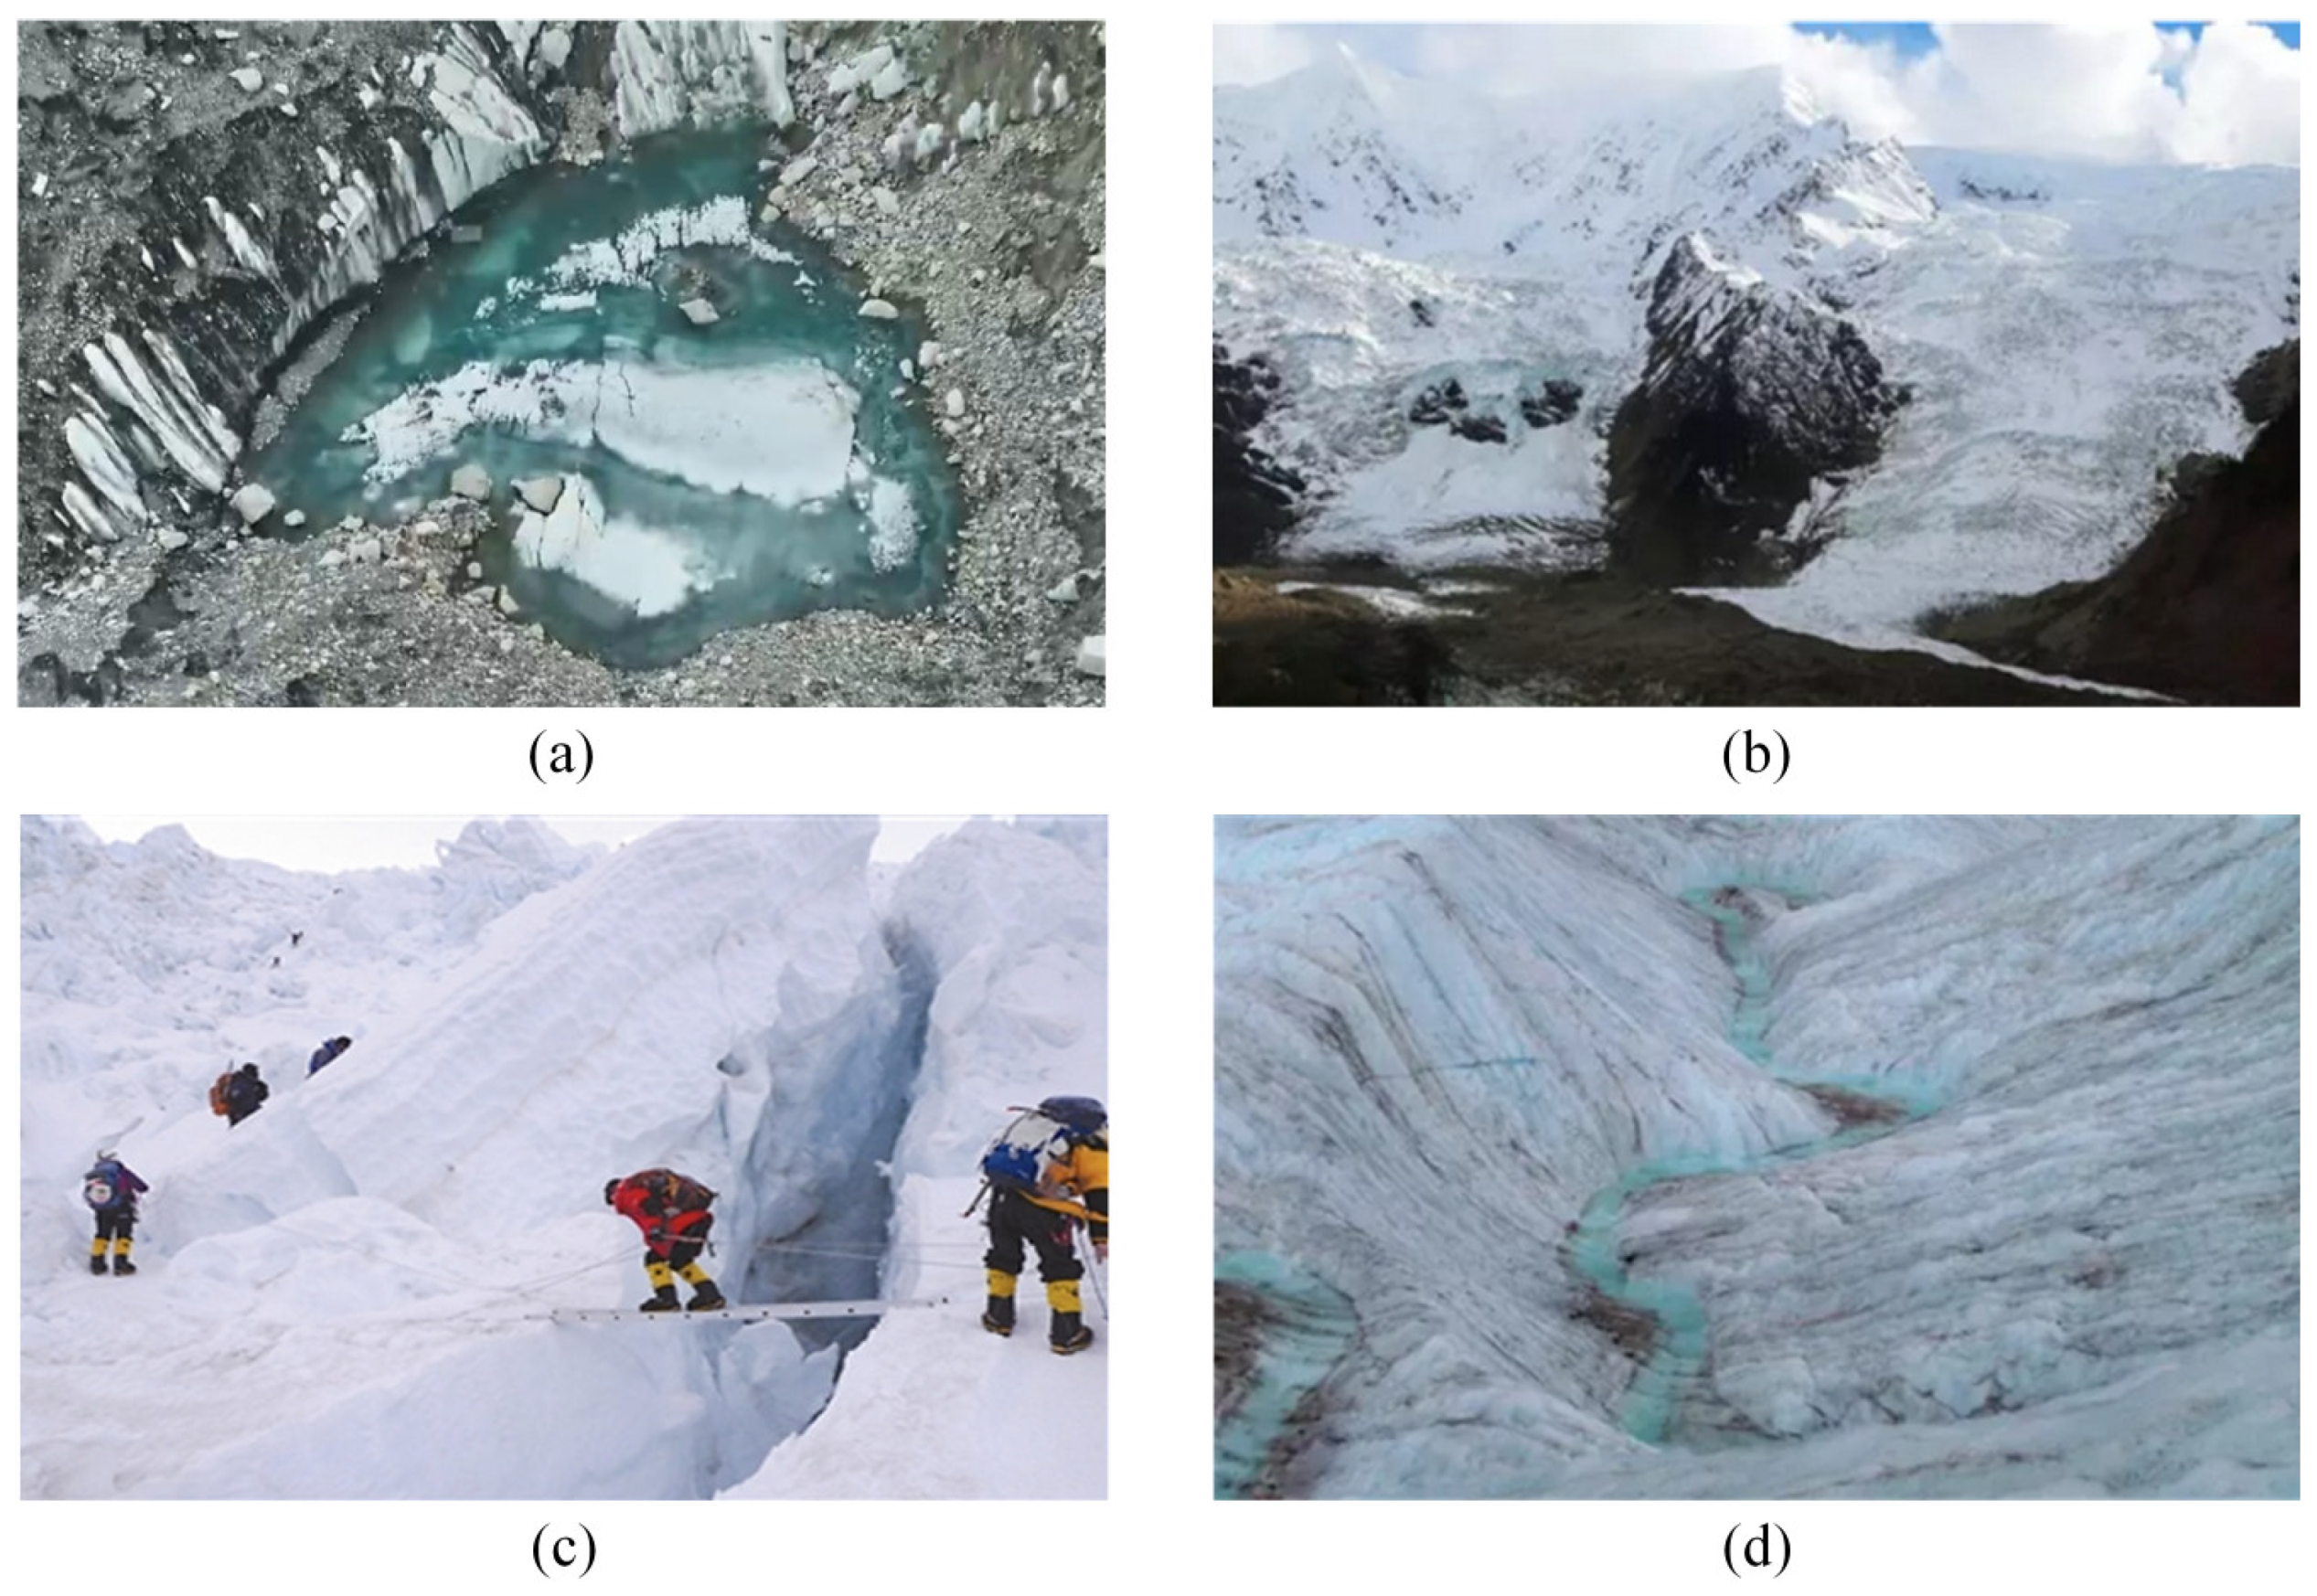 Remote Sensing | Free Full-Text | Comparing Methods for Segmenting Supra-Glacial  Lakes and Surface Features in the Mount Everest Region of the Himalayas  Using Chinese GaoFen-3 SAR Images | HTML